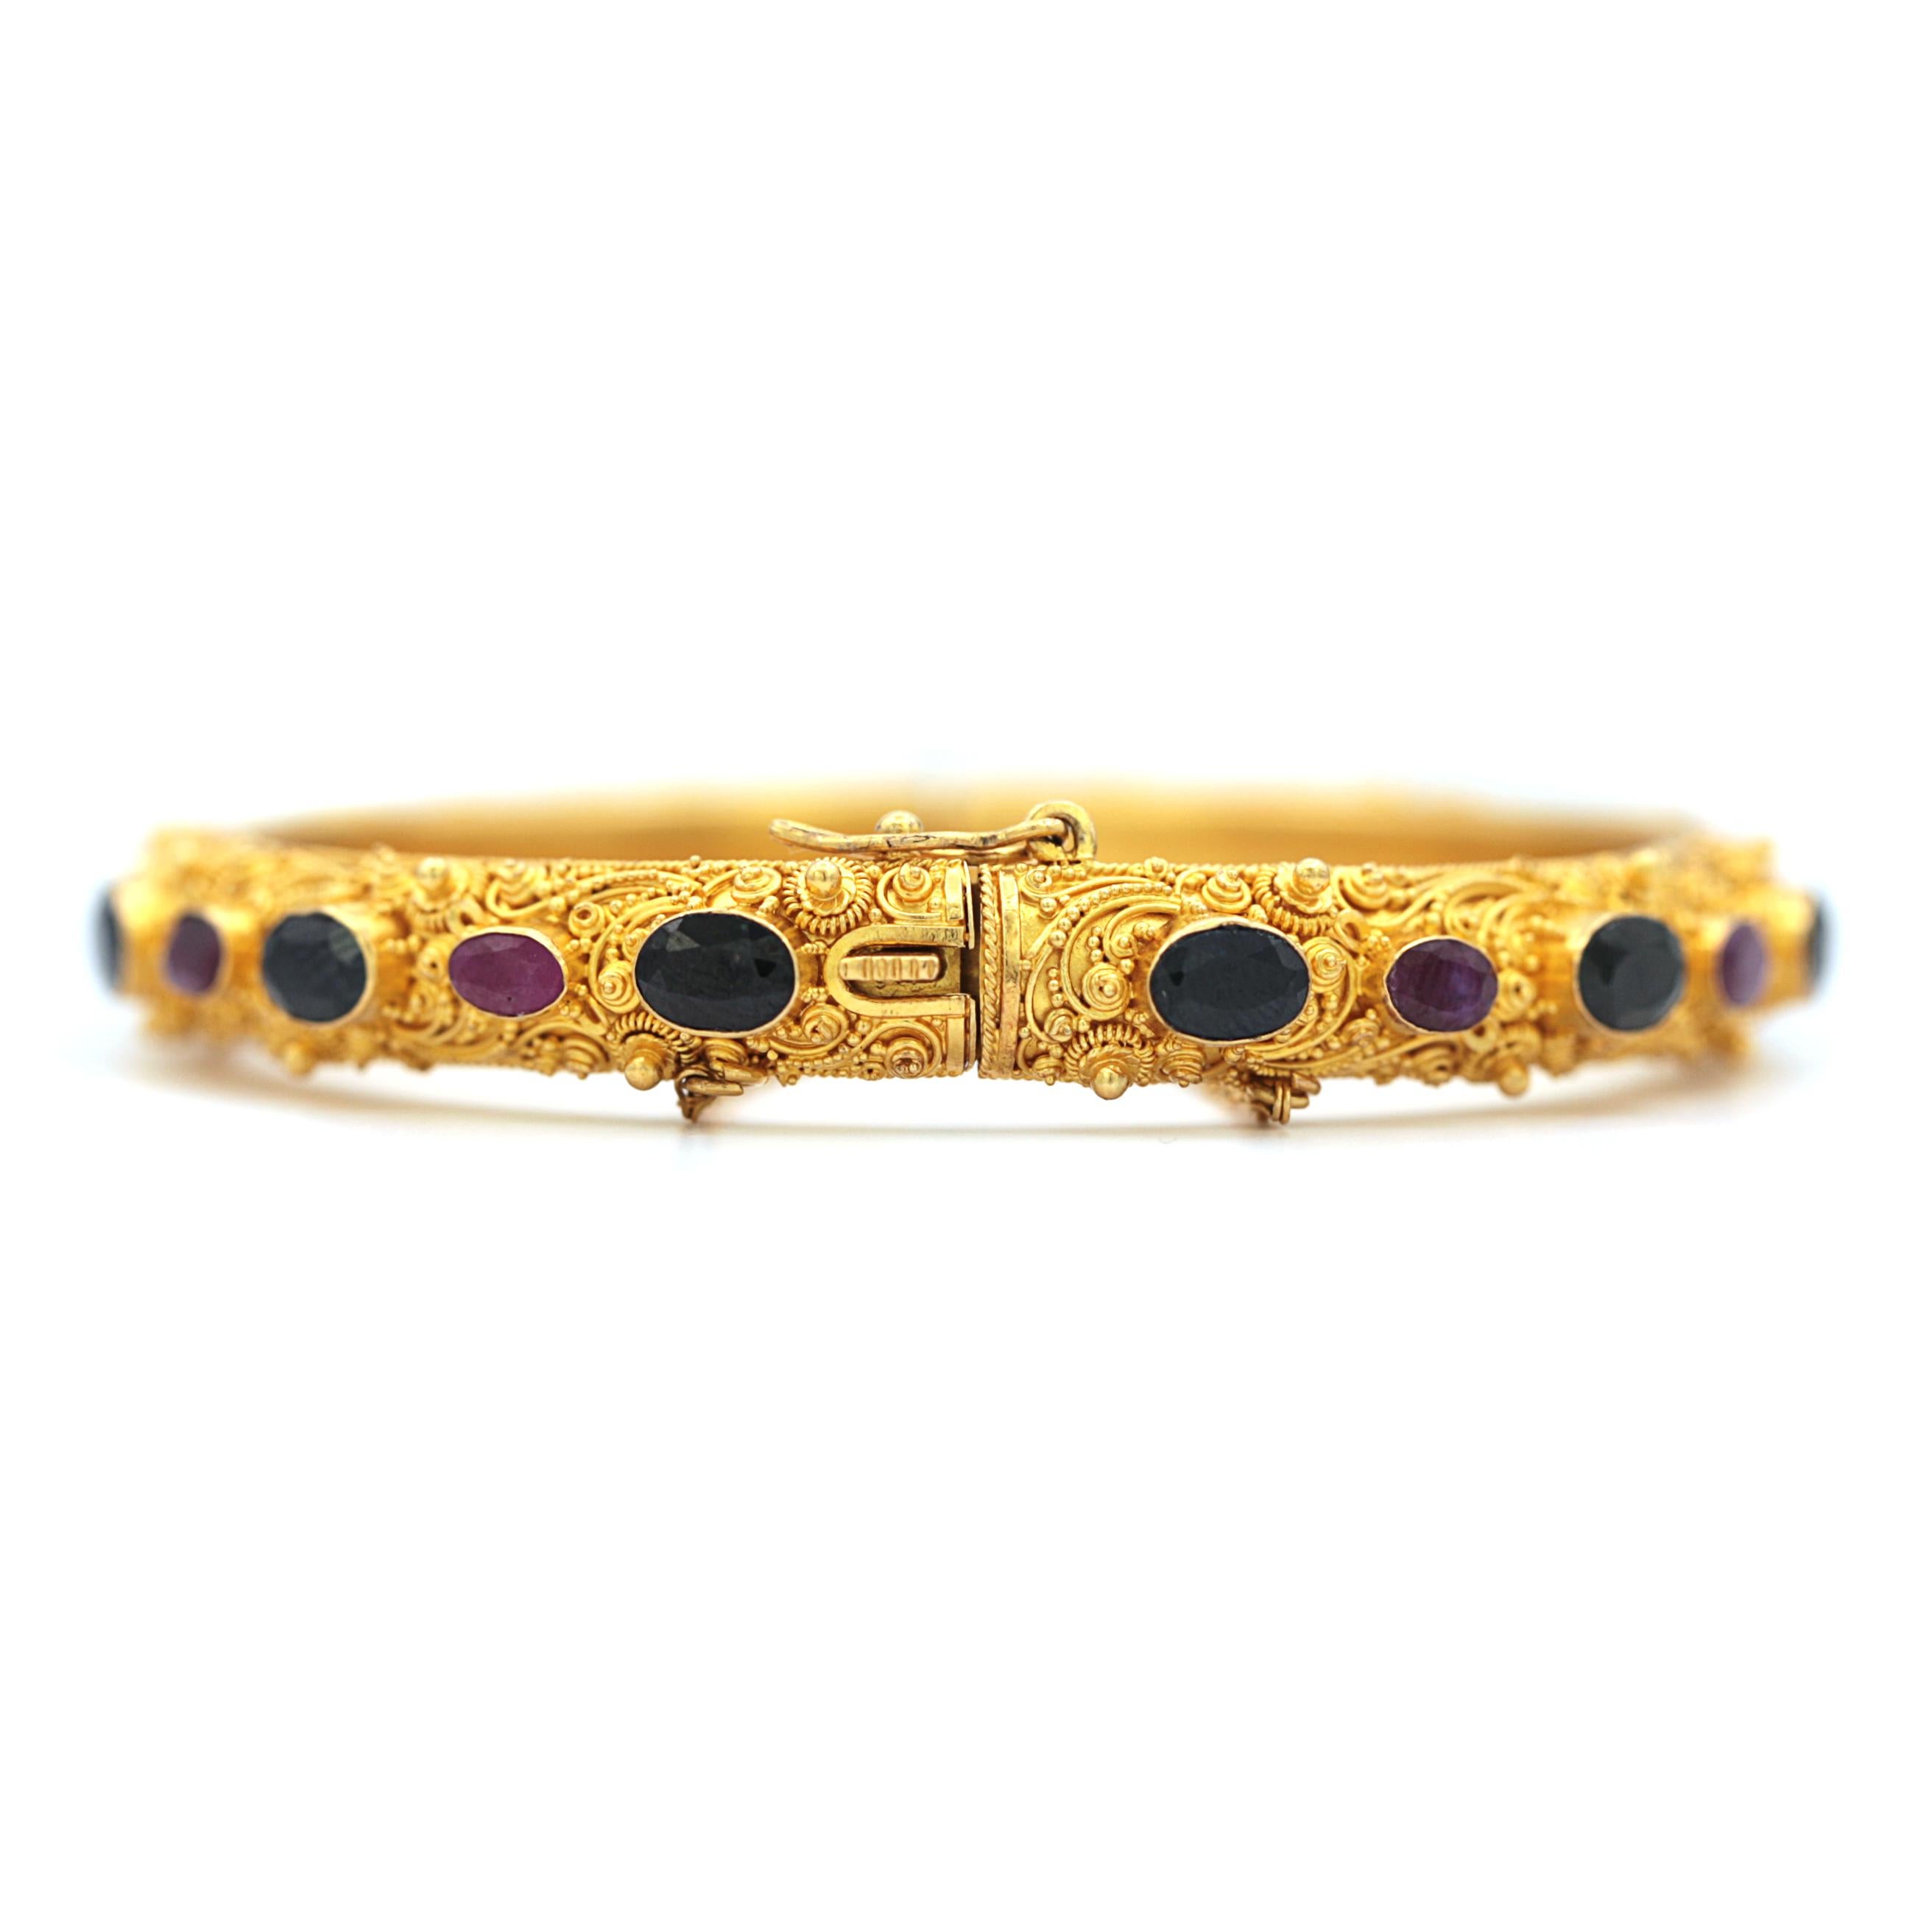 This 22 Karat Yellow Gold Bracelet is made out of 22 oval shape dark blue sapphires and red rubbies.
with a diameter of 5.5cm and 23.62 grams.

Every Upper-Luxury piece will arrive in an elegant jewelry box.
